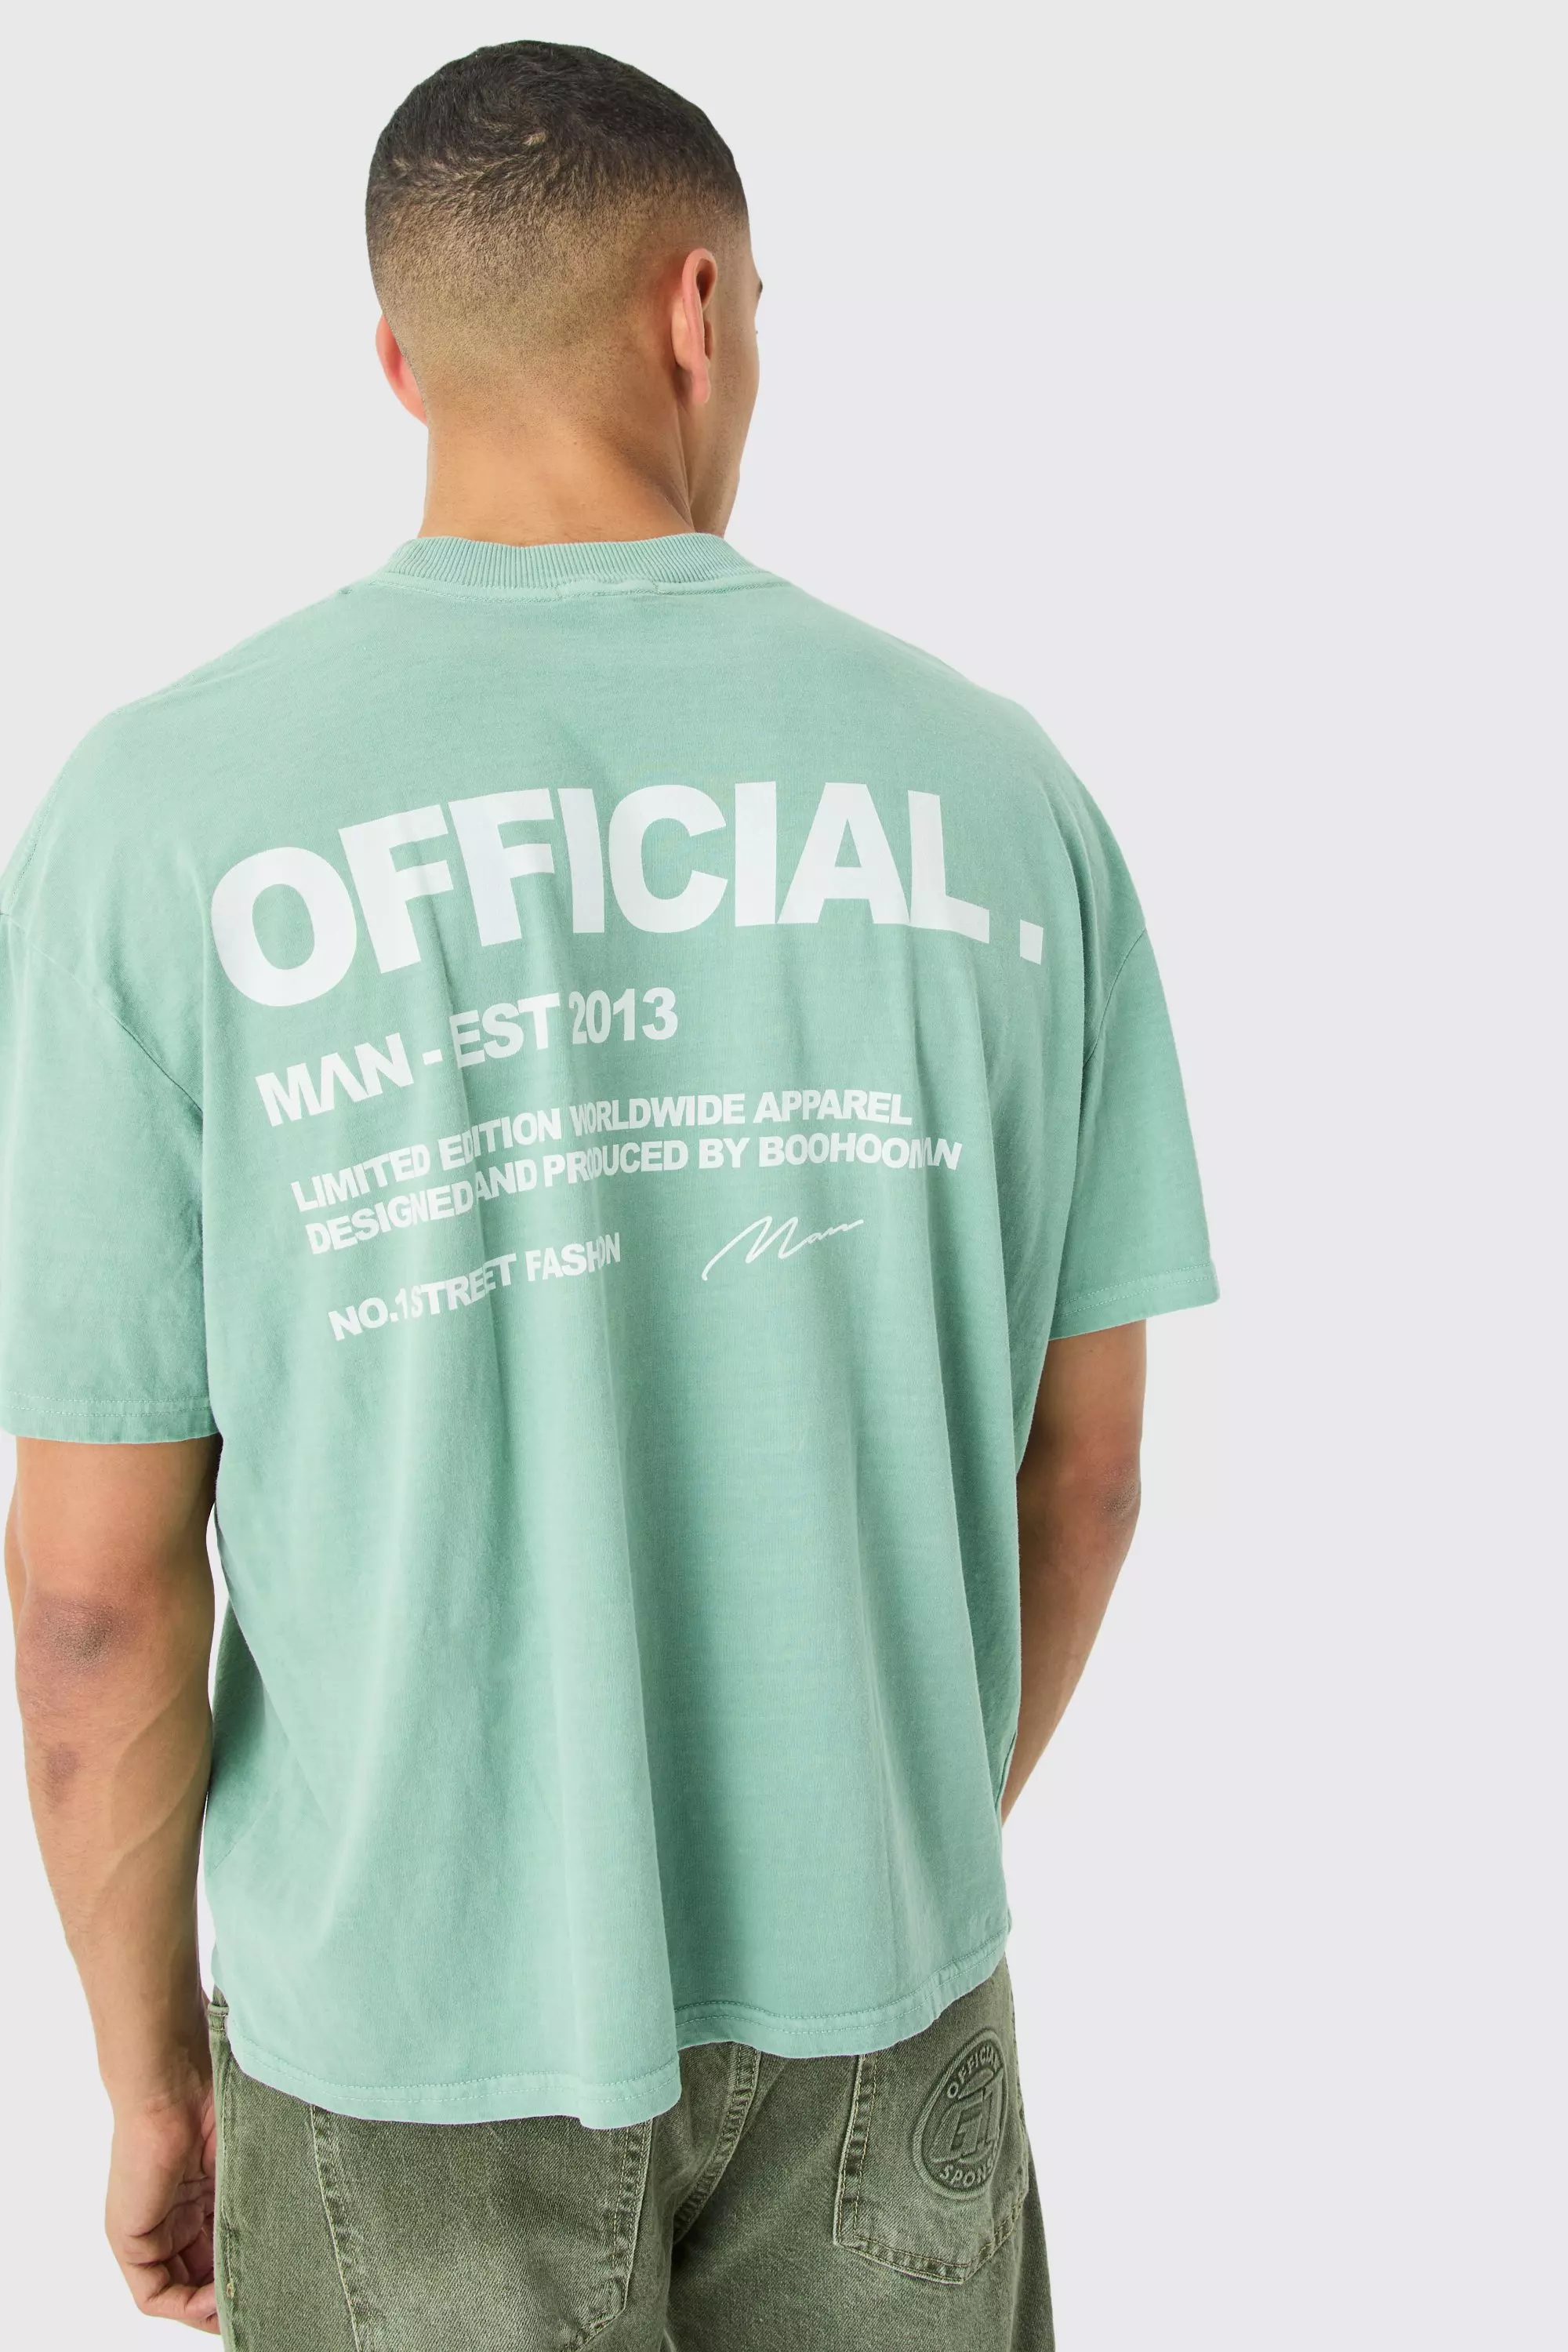 Oversized Overdye Official Graphic T-shirt Sage